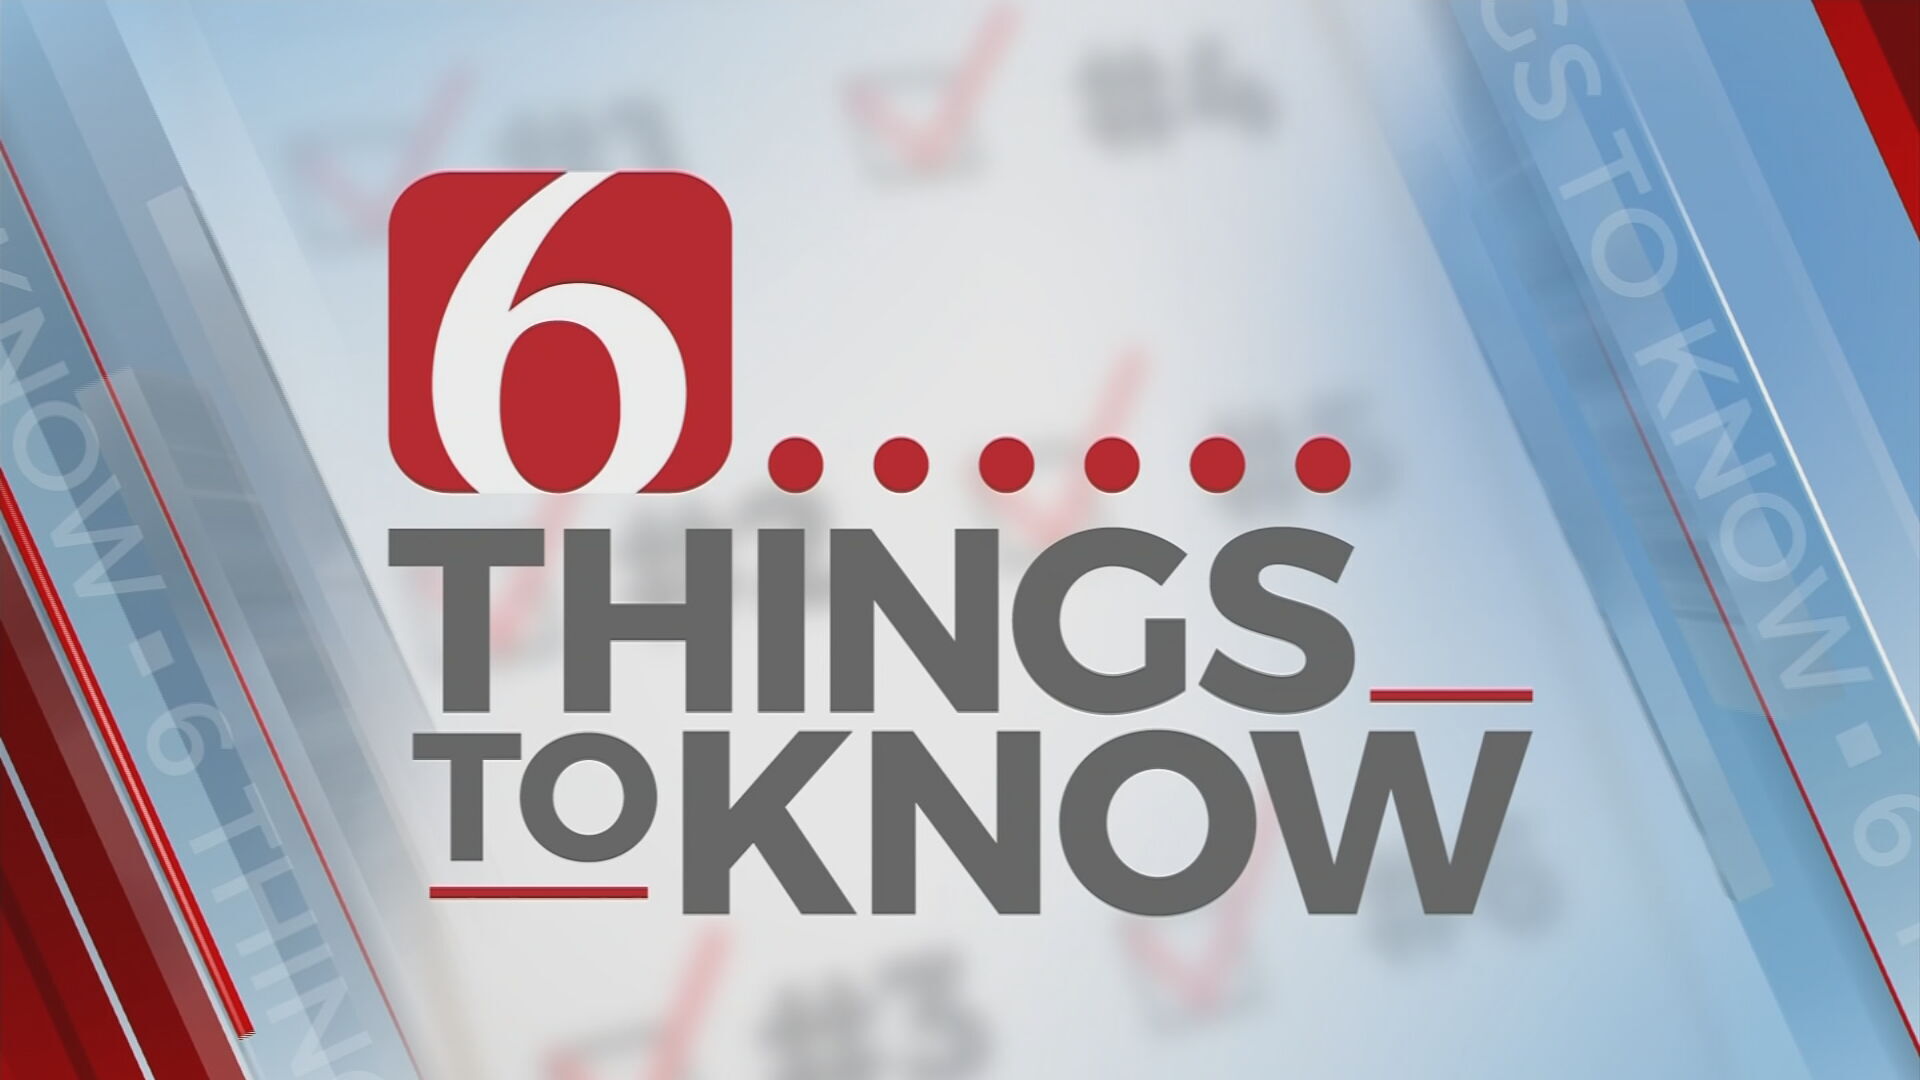 6 Things To Know (Jan 5): Healthcare Leaders Answer Vaccine Questions & Myths 